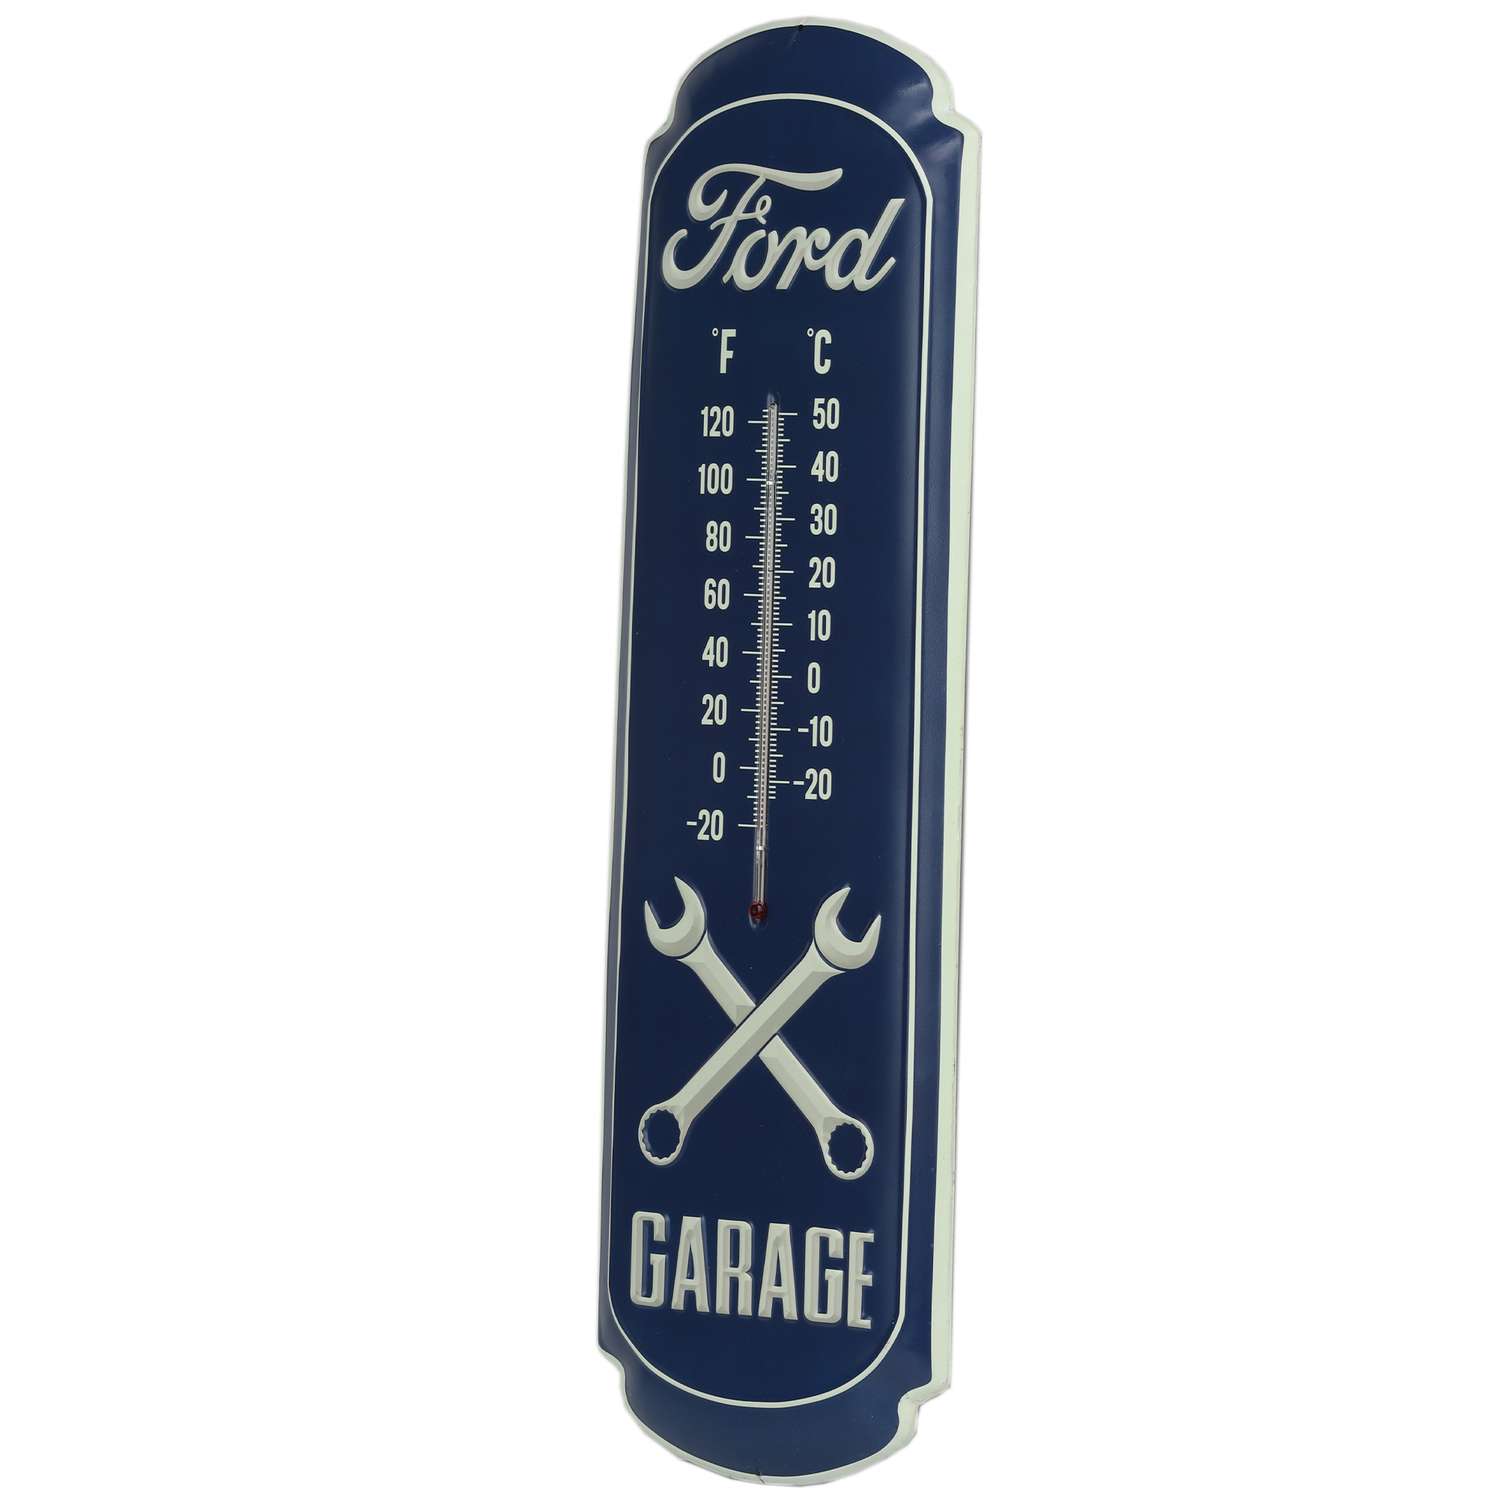 Ford Garage Thermometer By Open Road Brands Brand New Glows In The Dark